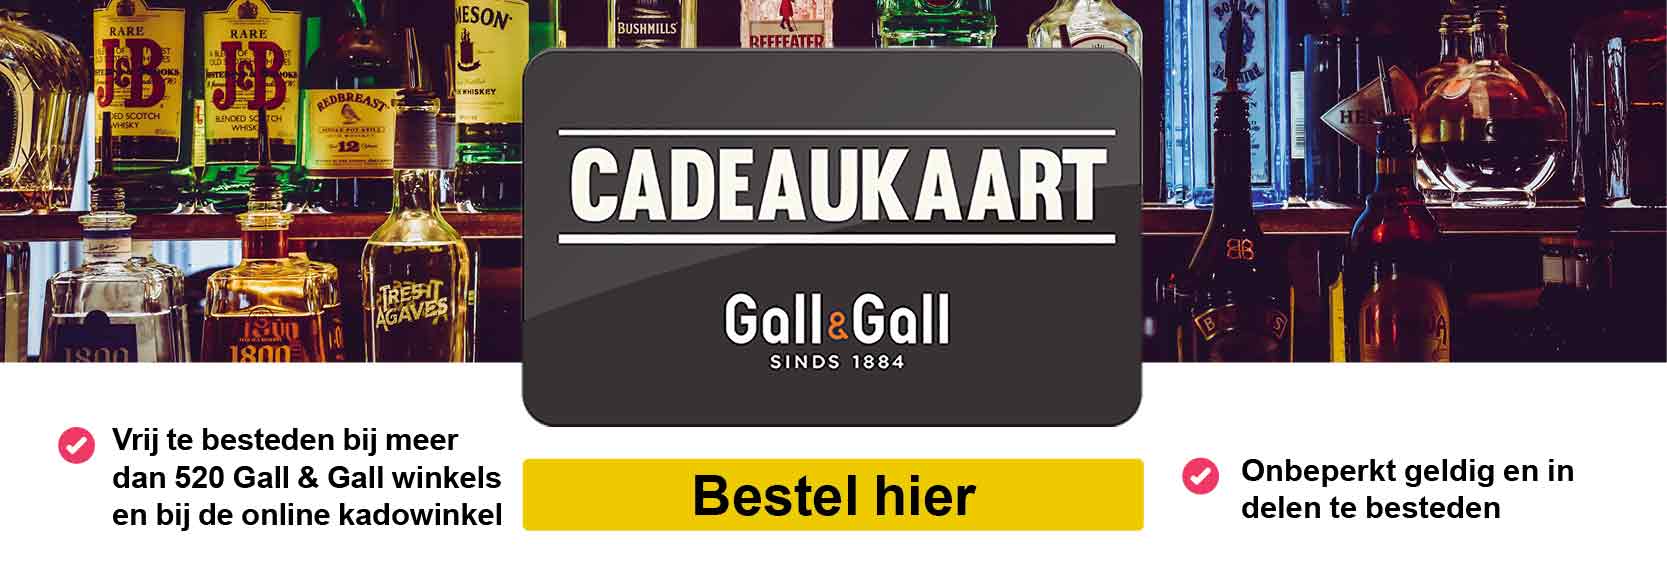 Gall_gall_banner_def